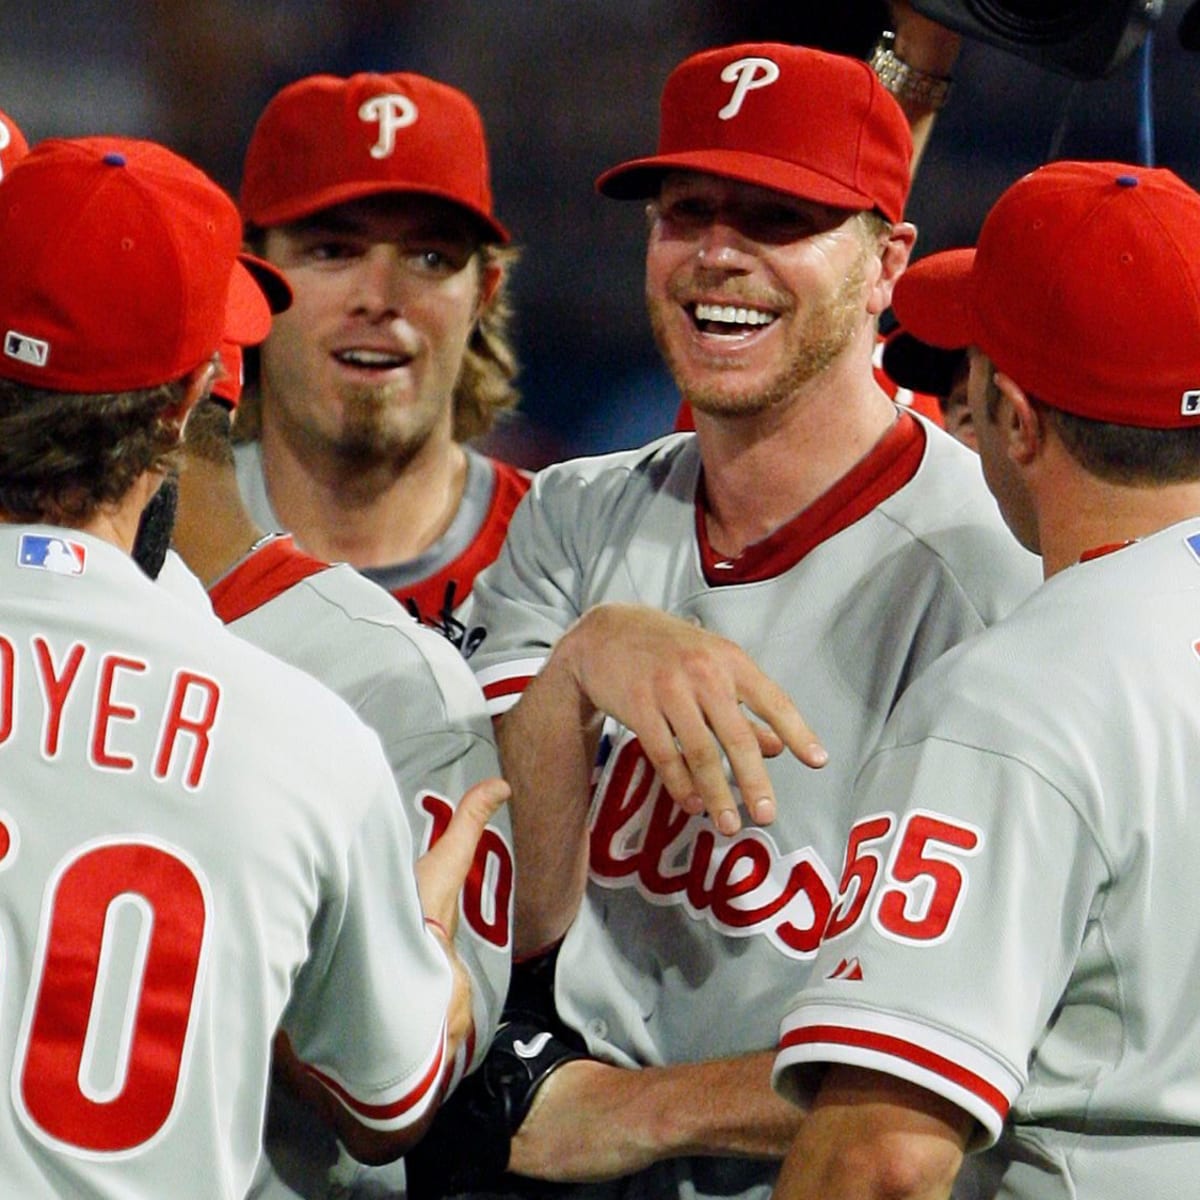 Phillies vs. Mets: Halladay Pitches Complete Game to Earn 2-1 Win